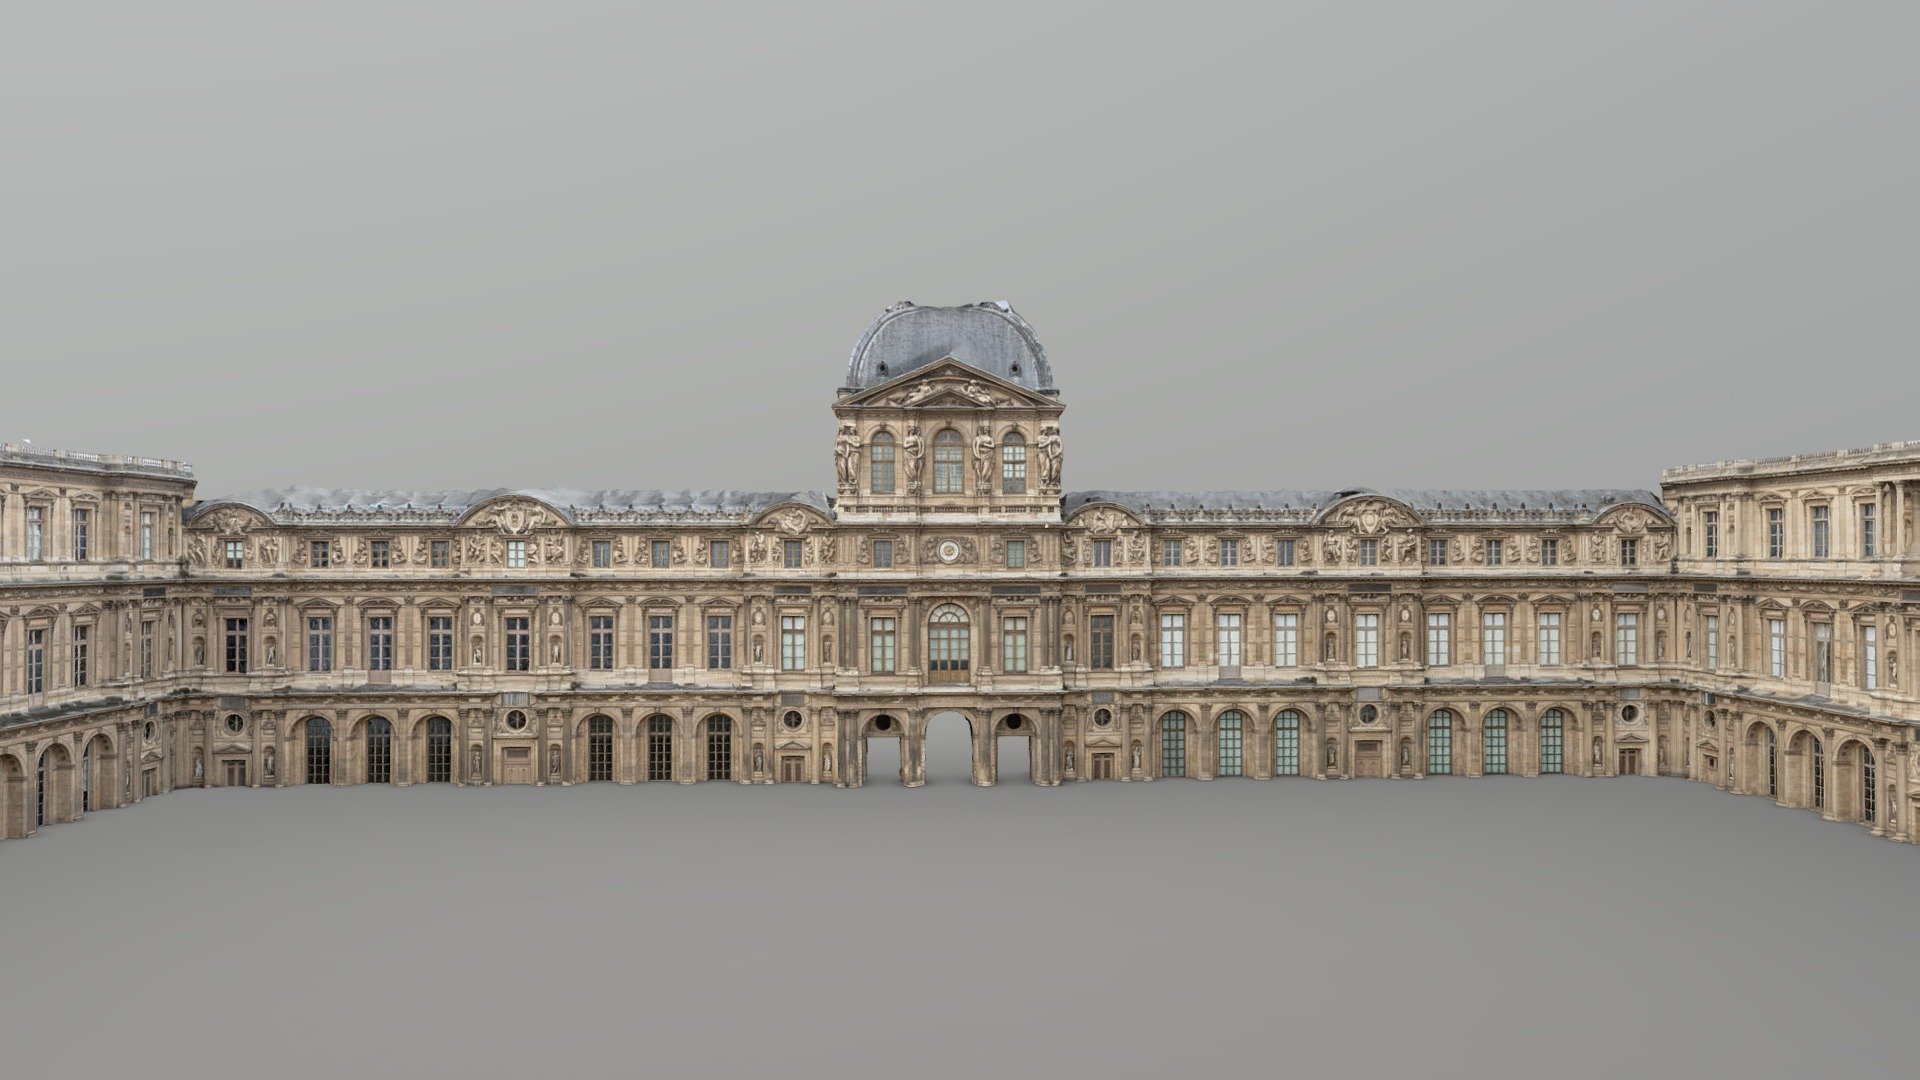 The Cour Carrée (Square Court) is one of the main courtyards of the Louvre Museum. It was the palace for the kings and queens from 1546 until 1682 (Louis XIV chose Versailles).

Reconstructed with Reality Capture without drone (368 images).

8K + 16k textures (diffuse and normal) 3d model